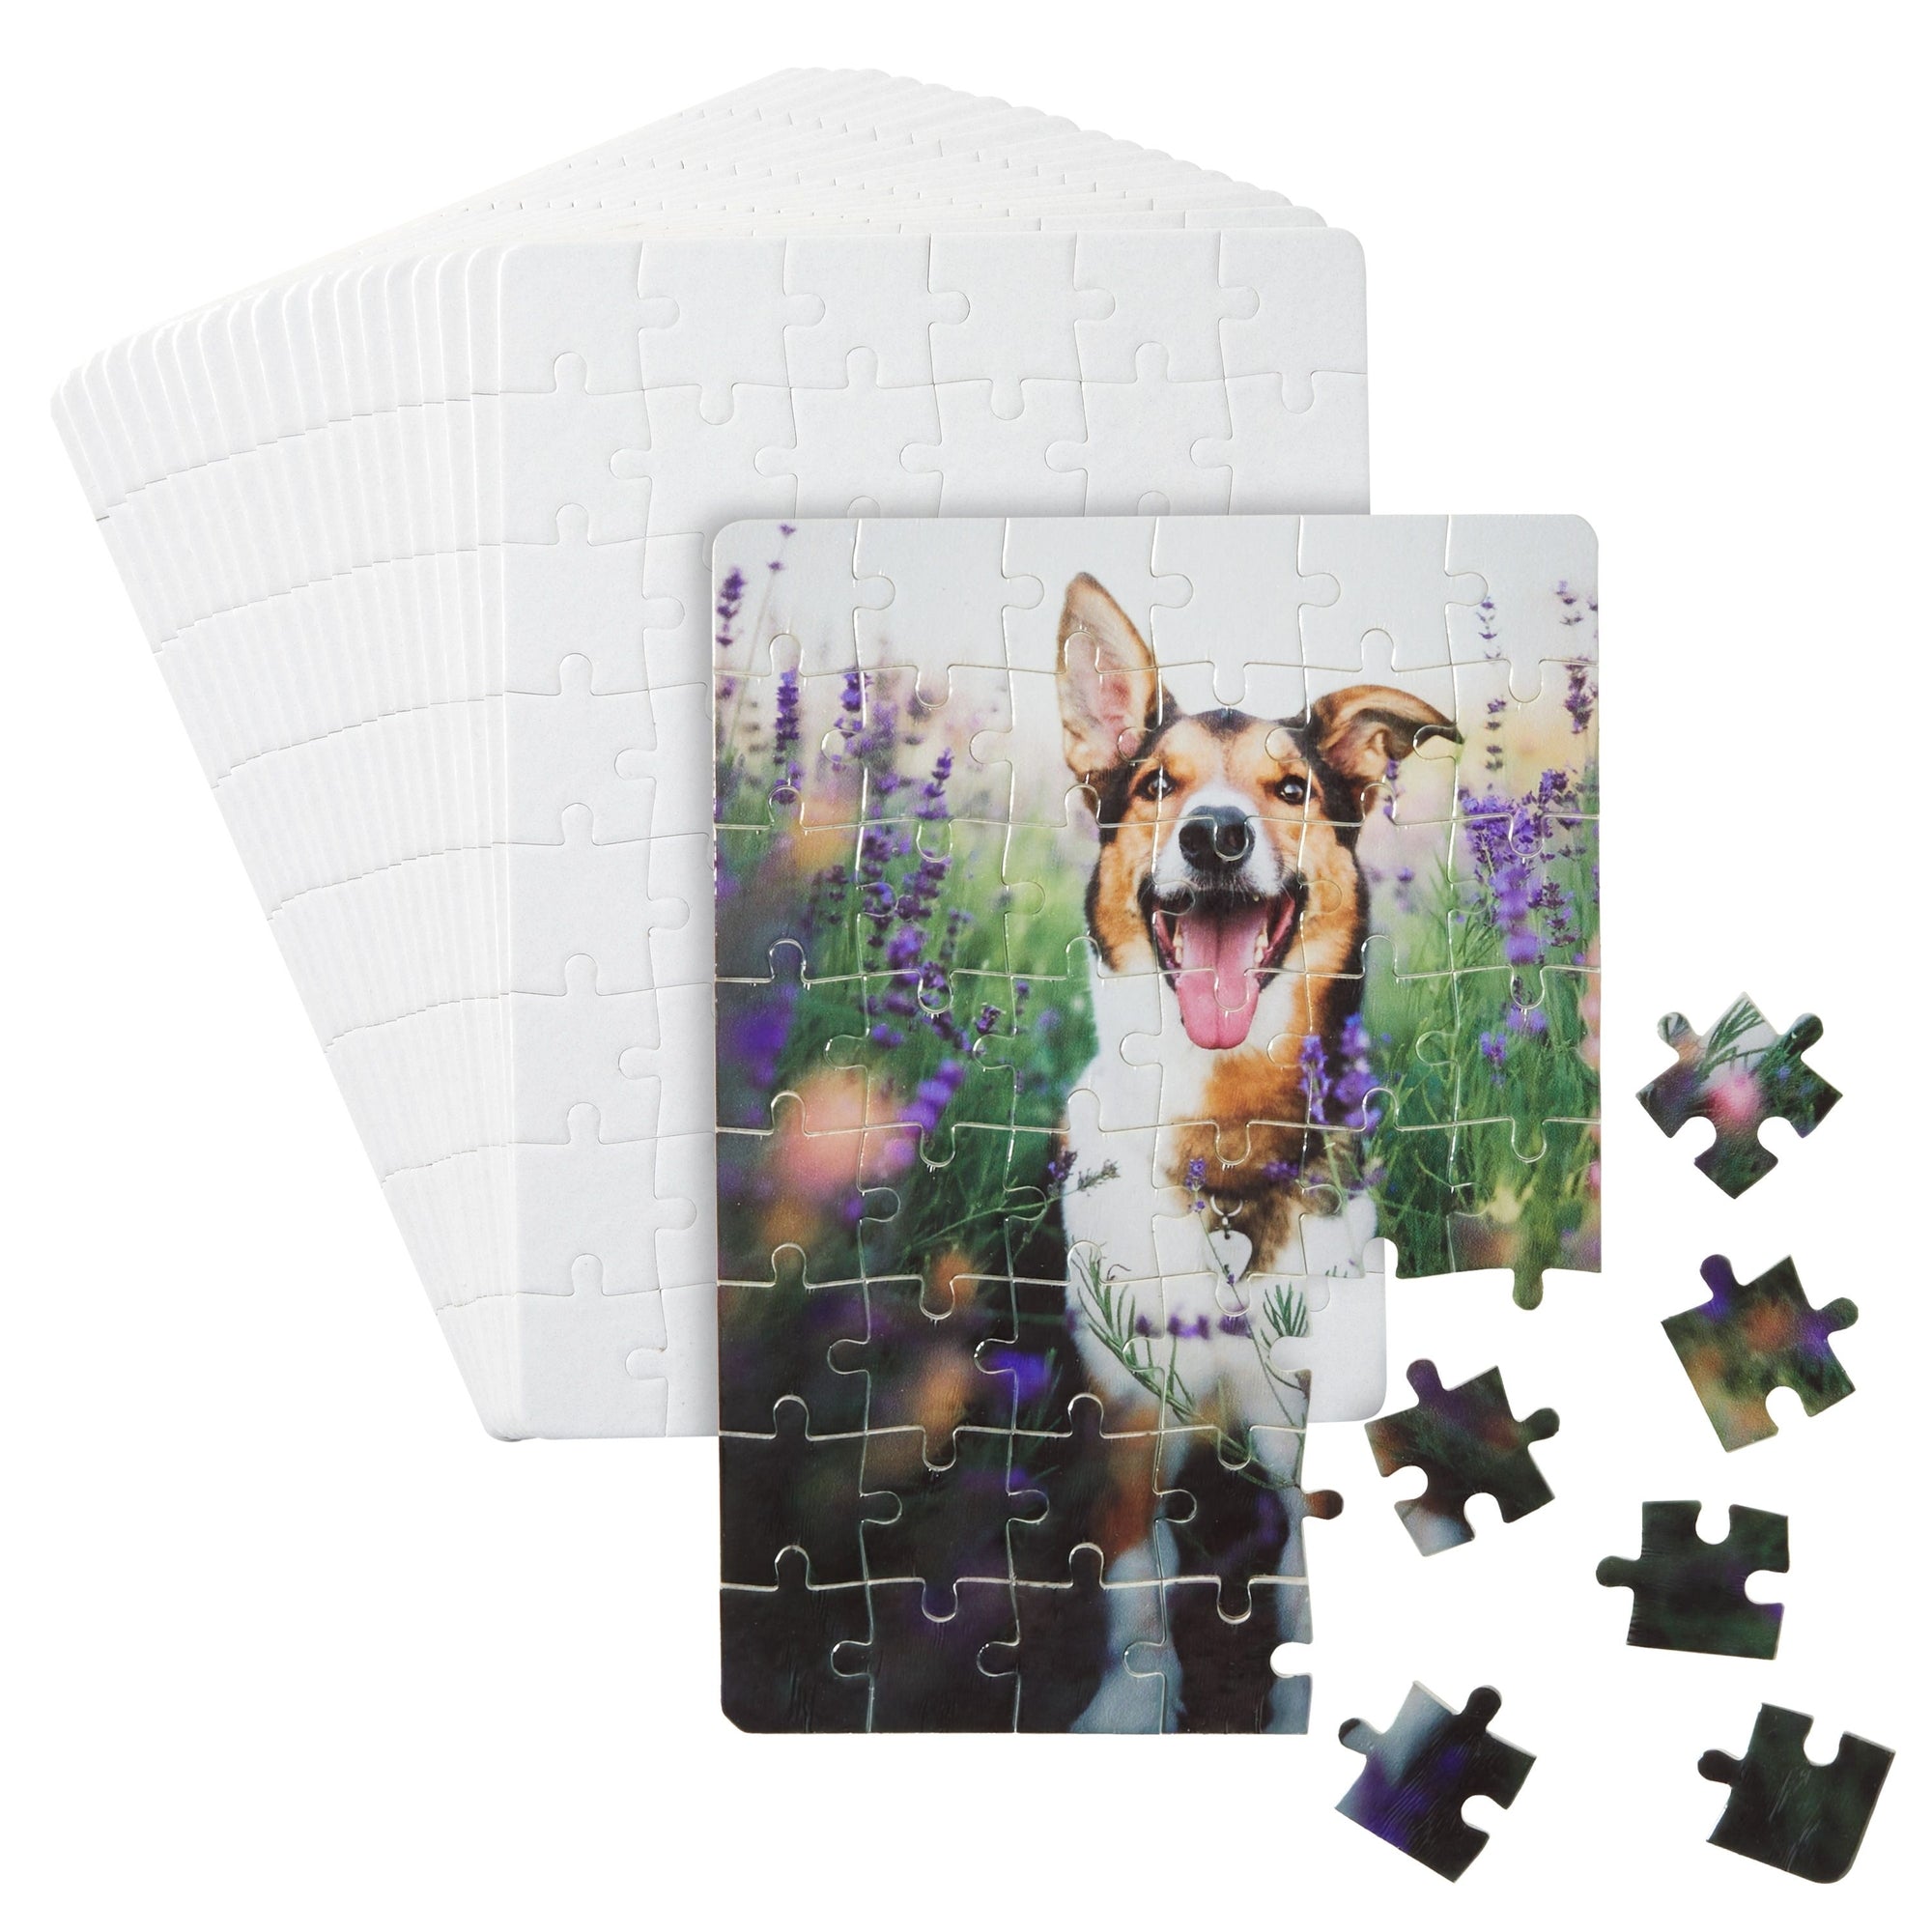 Bright Creations 10 Sets Blank Sublimation Puzzles for DIY Crafts, A4 120-Piece Jigsaws for Heat Press Thermal Transfer